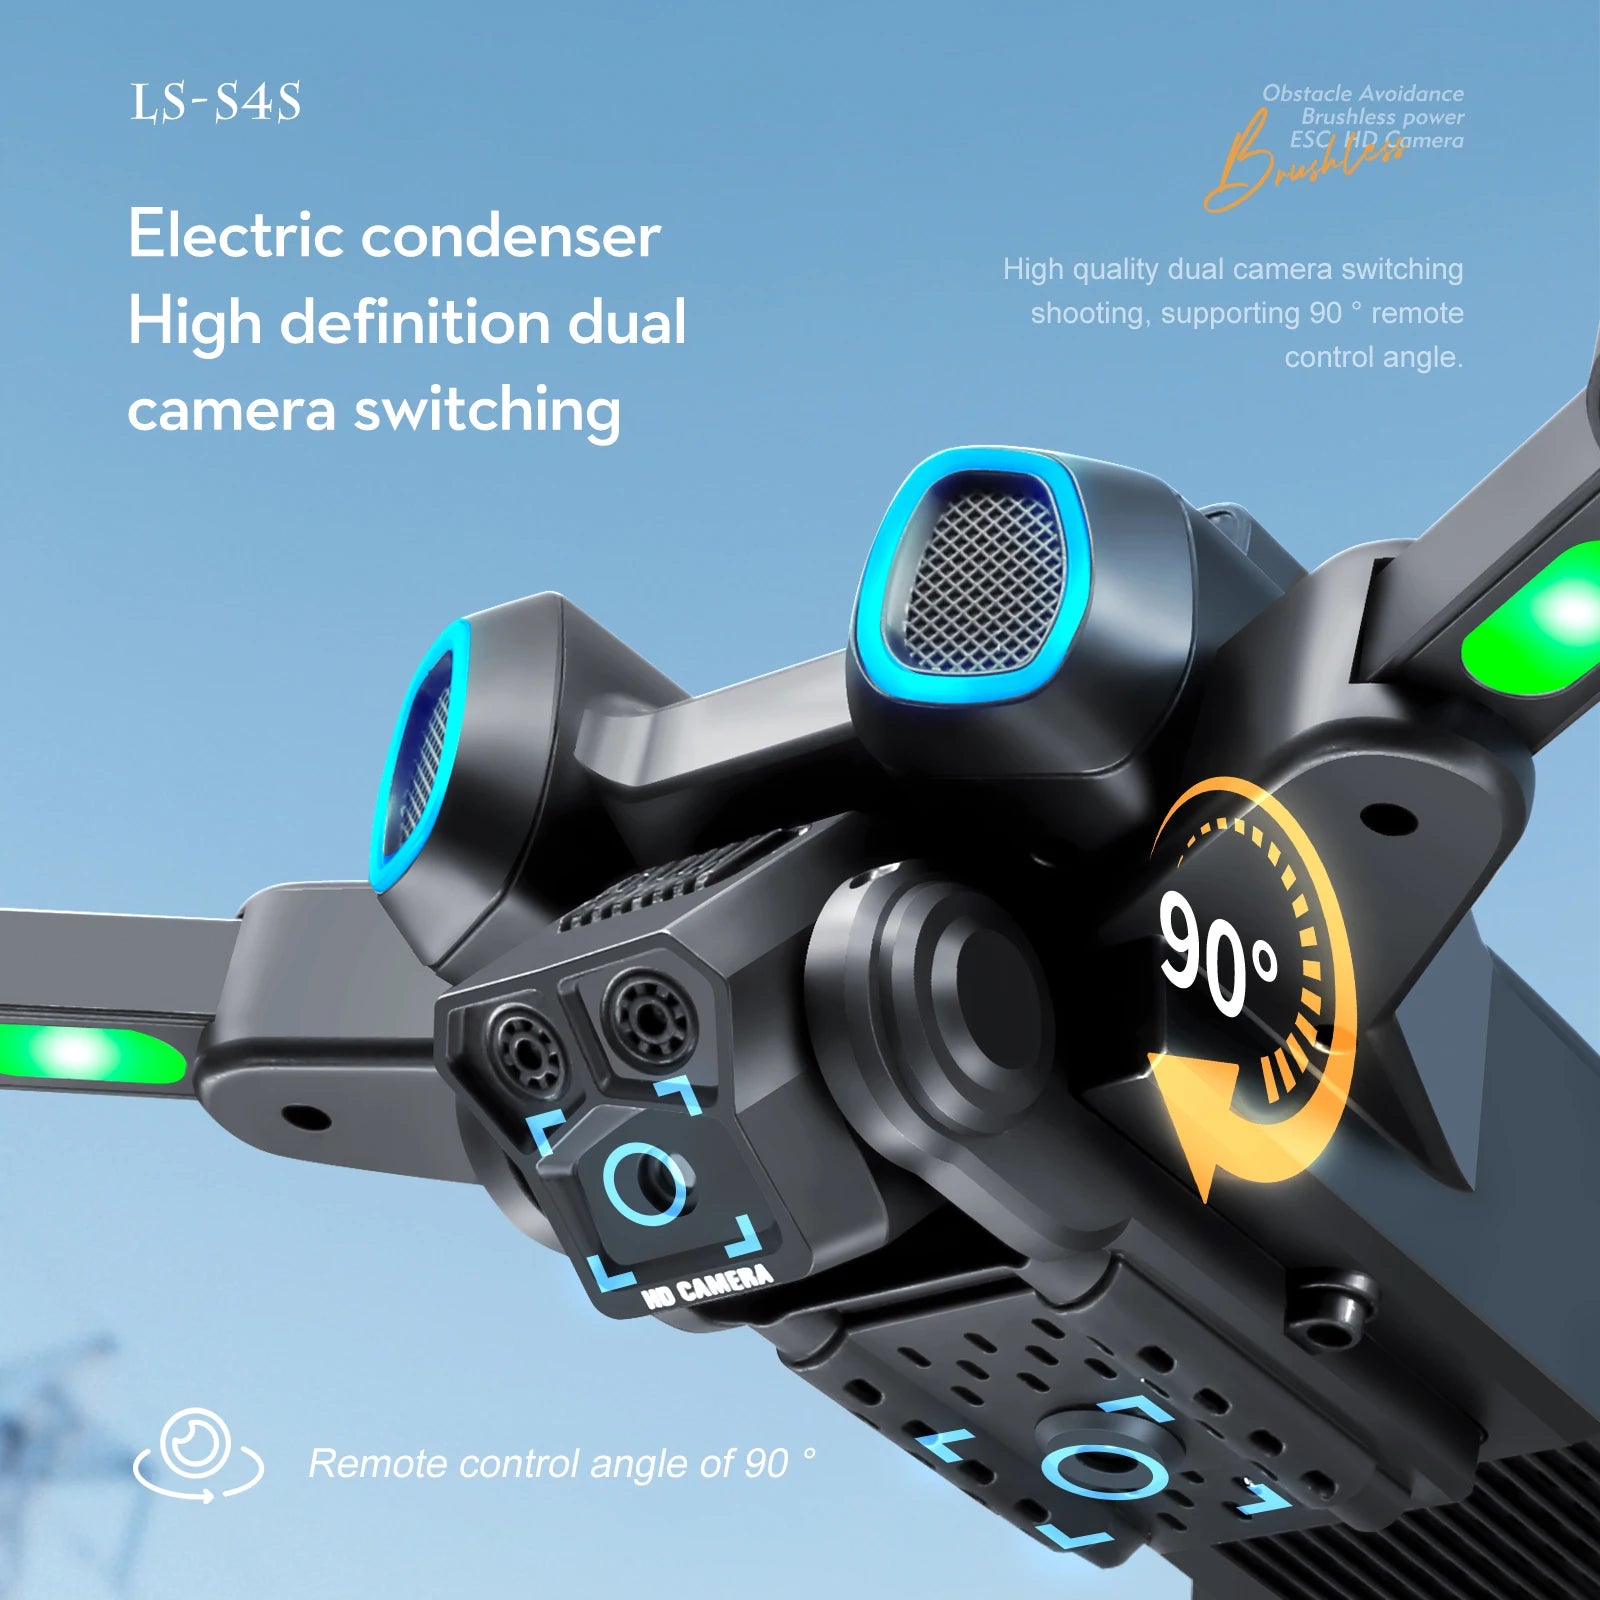 S4S Drone, LS-S4S Brushless power pe Electric condenser High quality dual camera